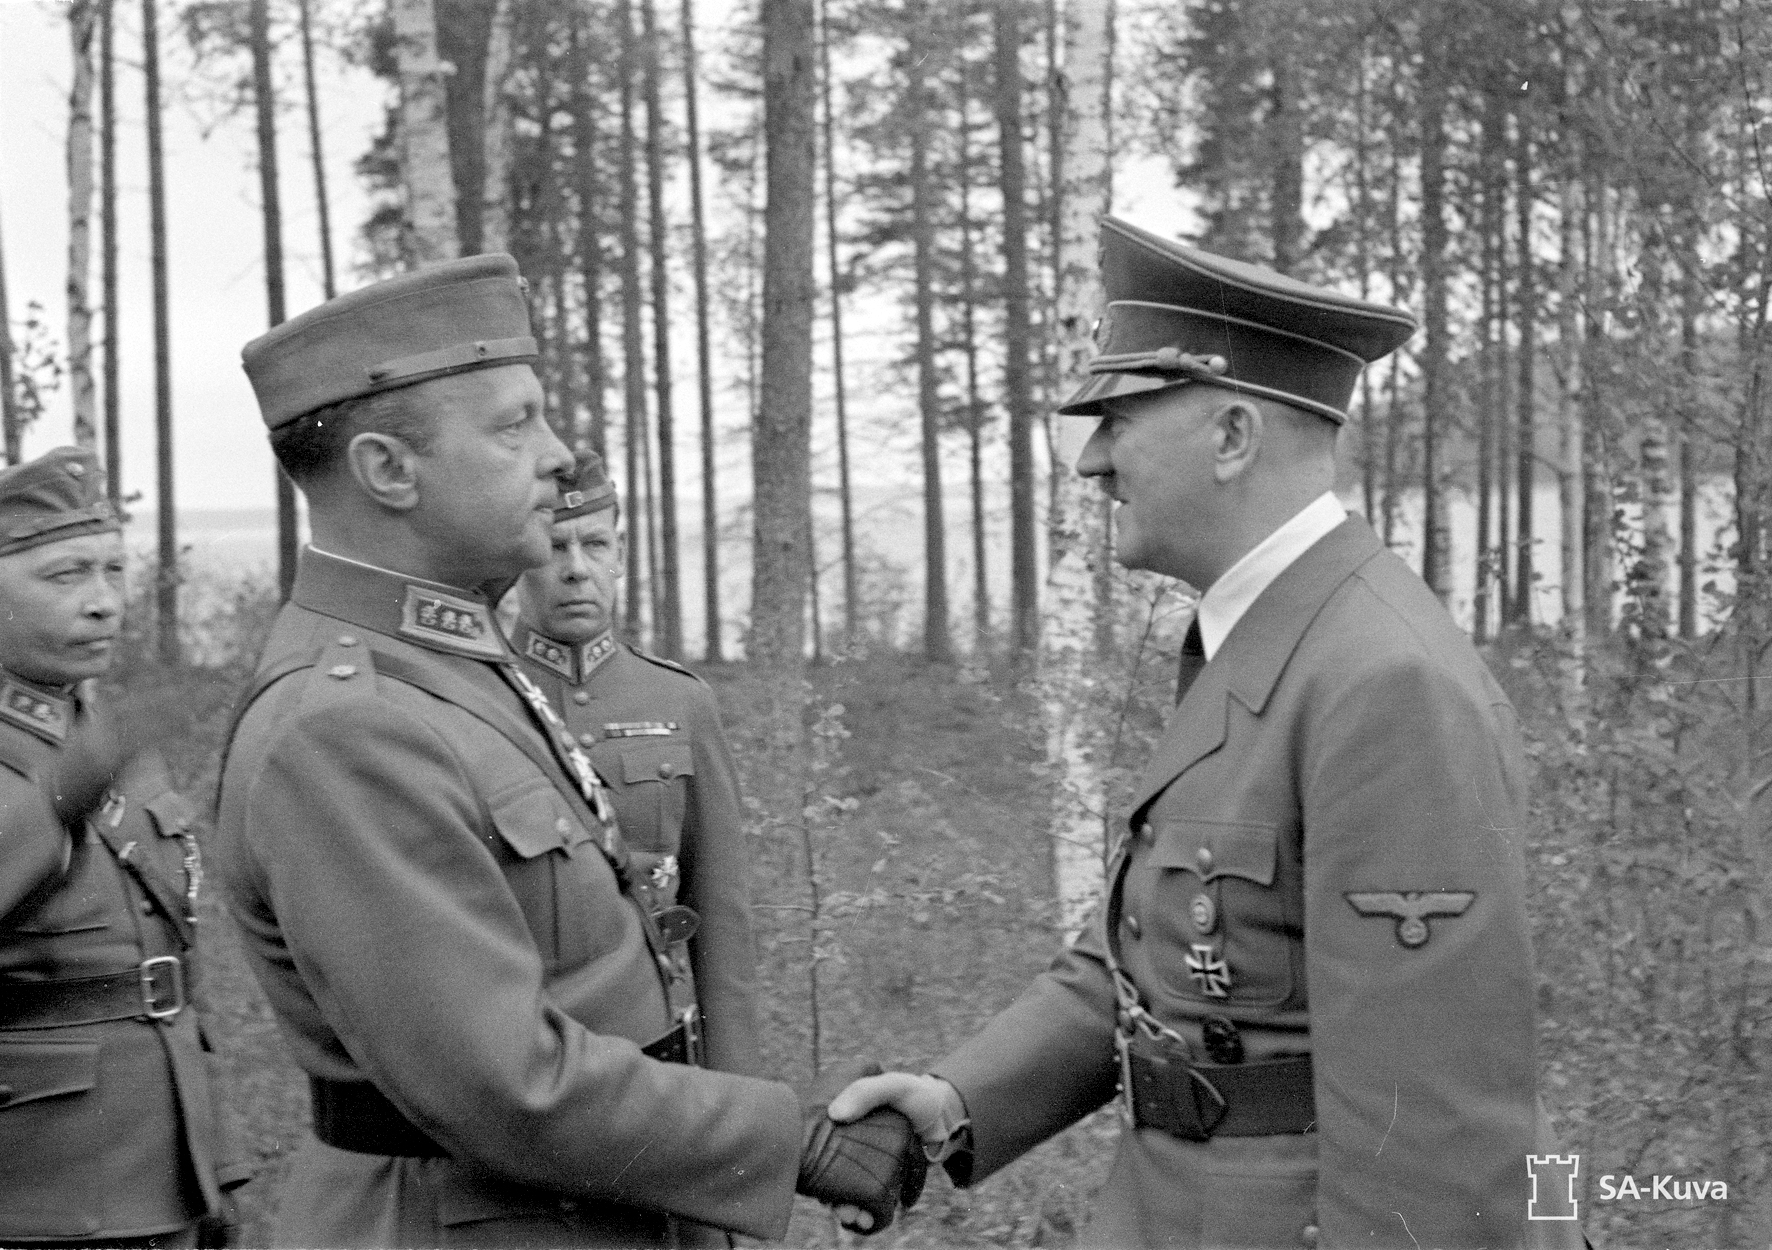 Adolf Hitler greets a Finnish officer during his visit in Finland